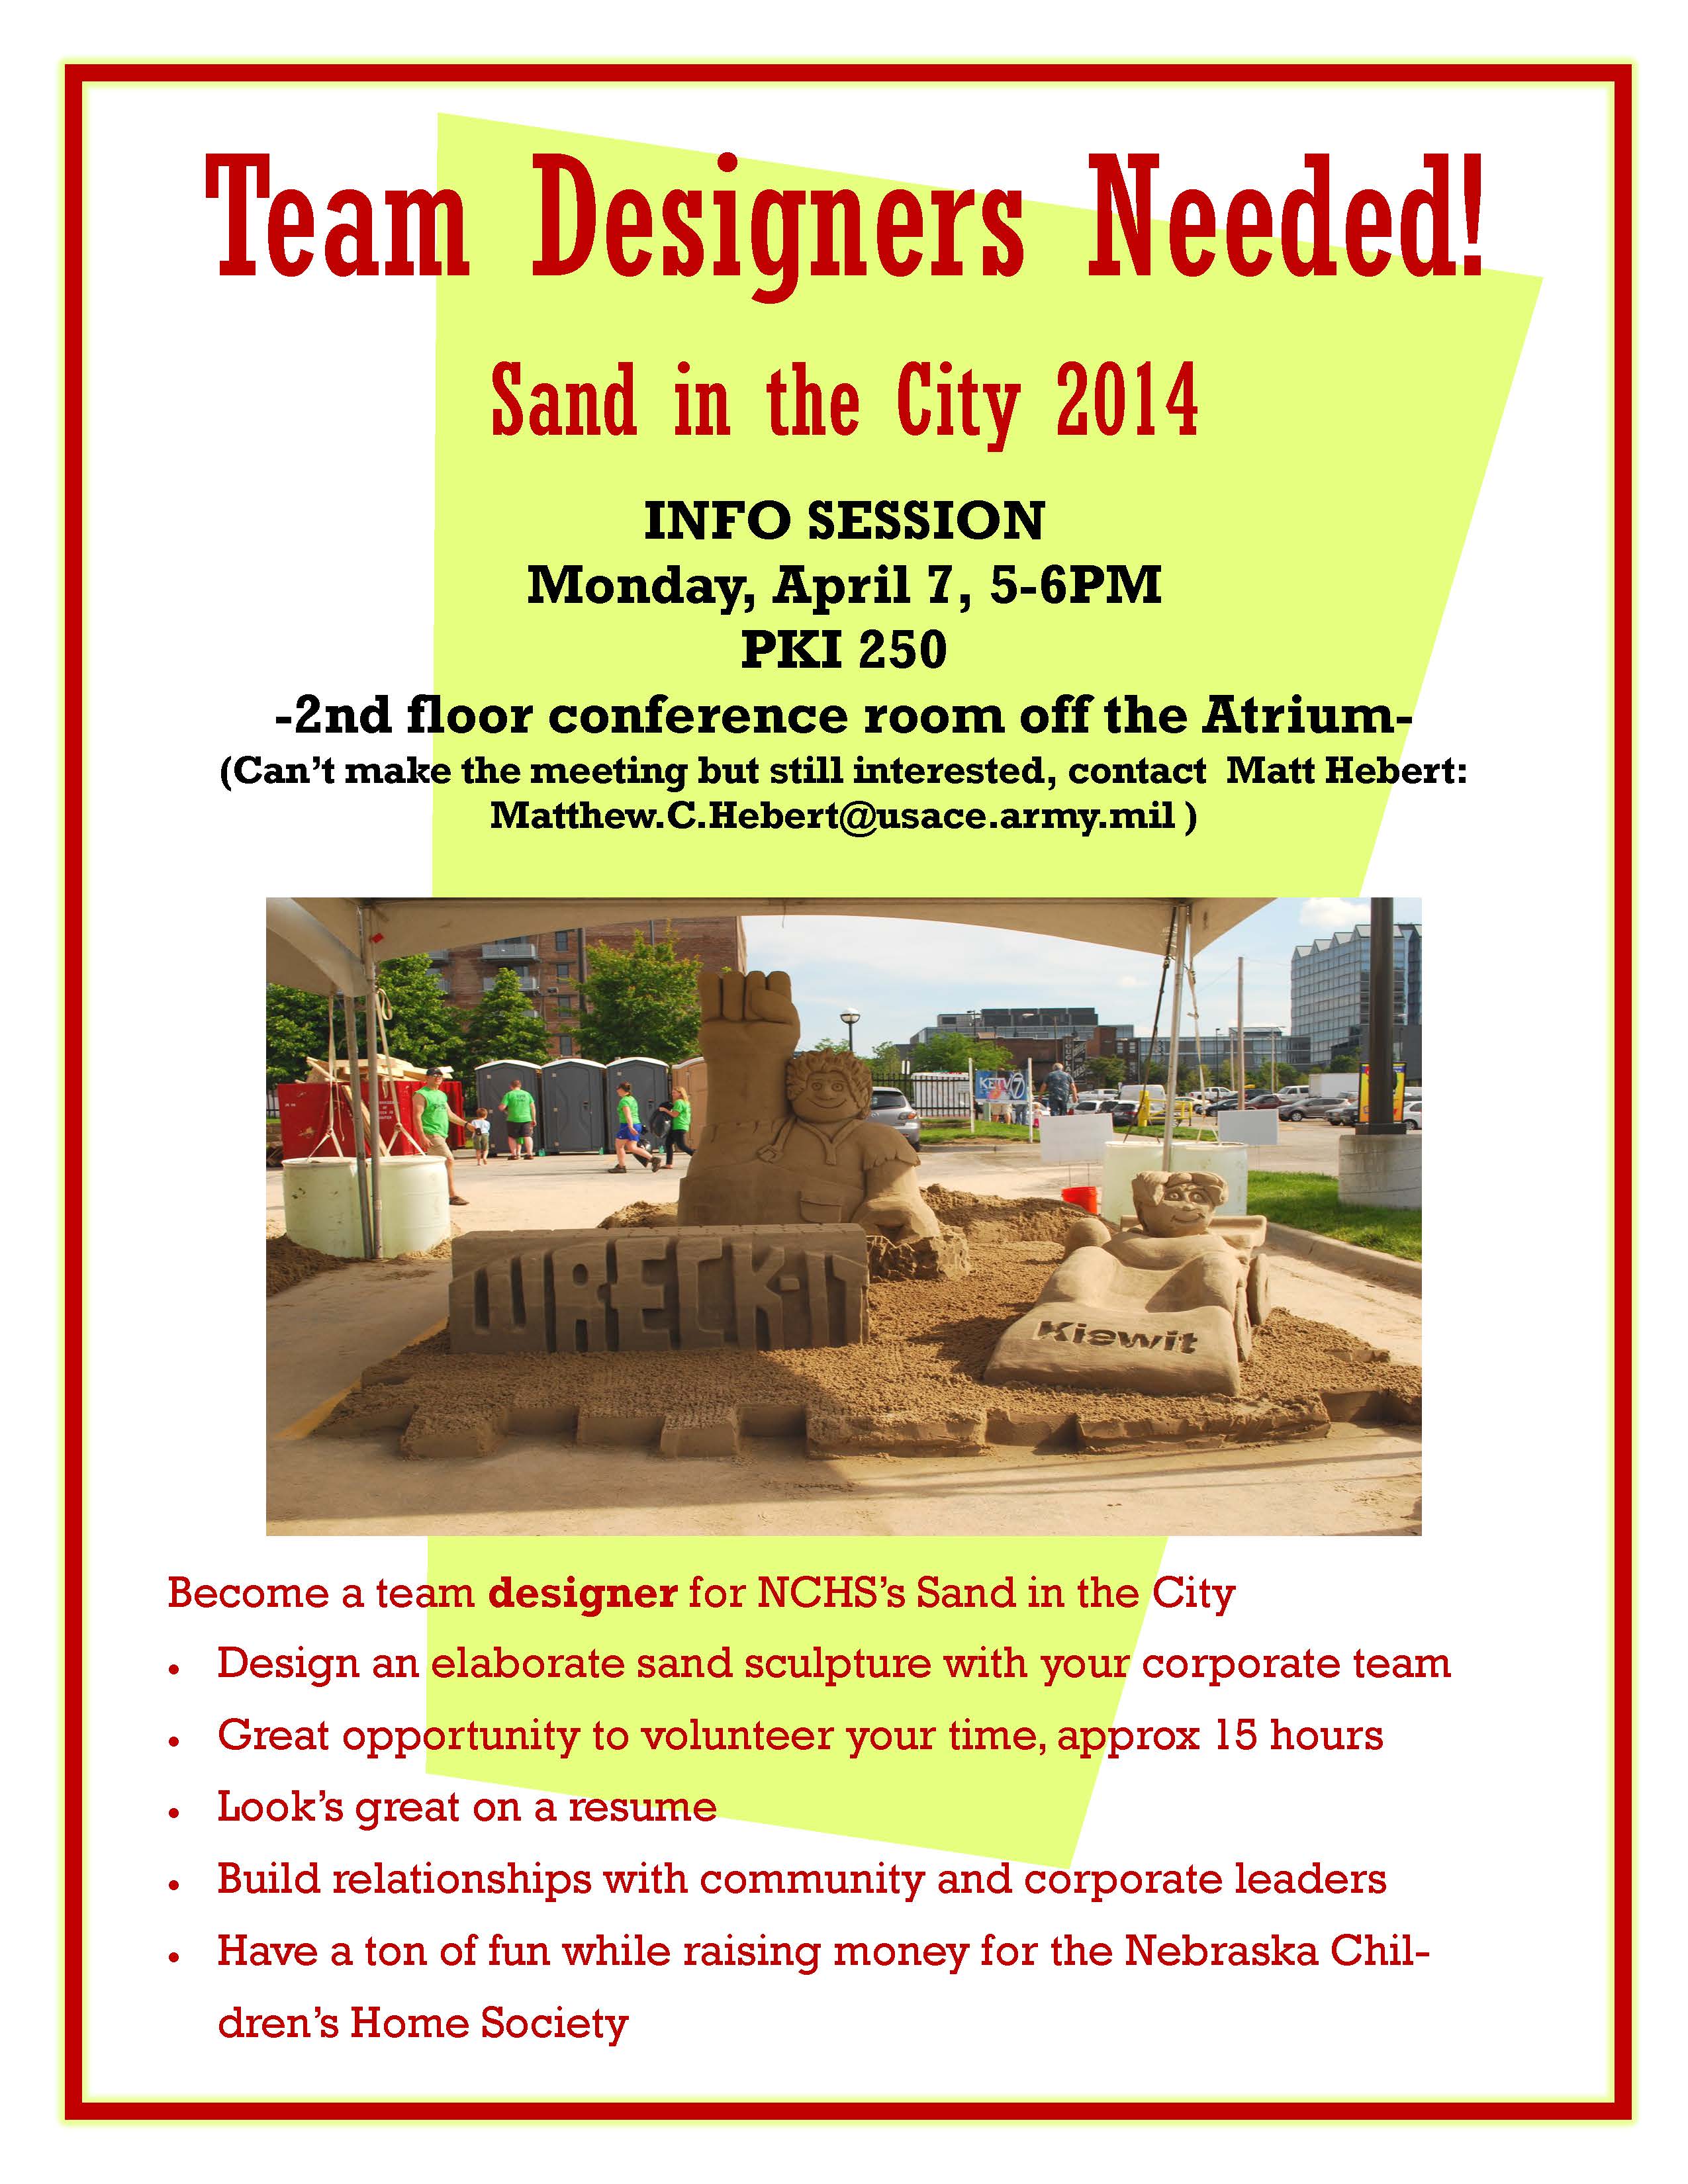 Sand in the City info session is April 7, 5-6 p.m. in PKI 250